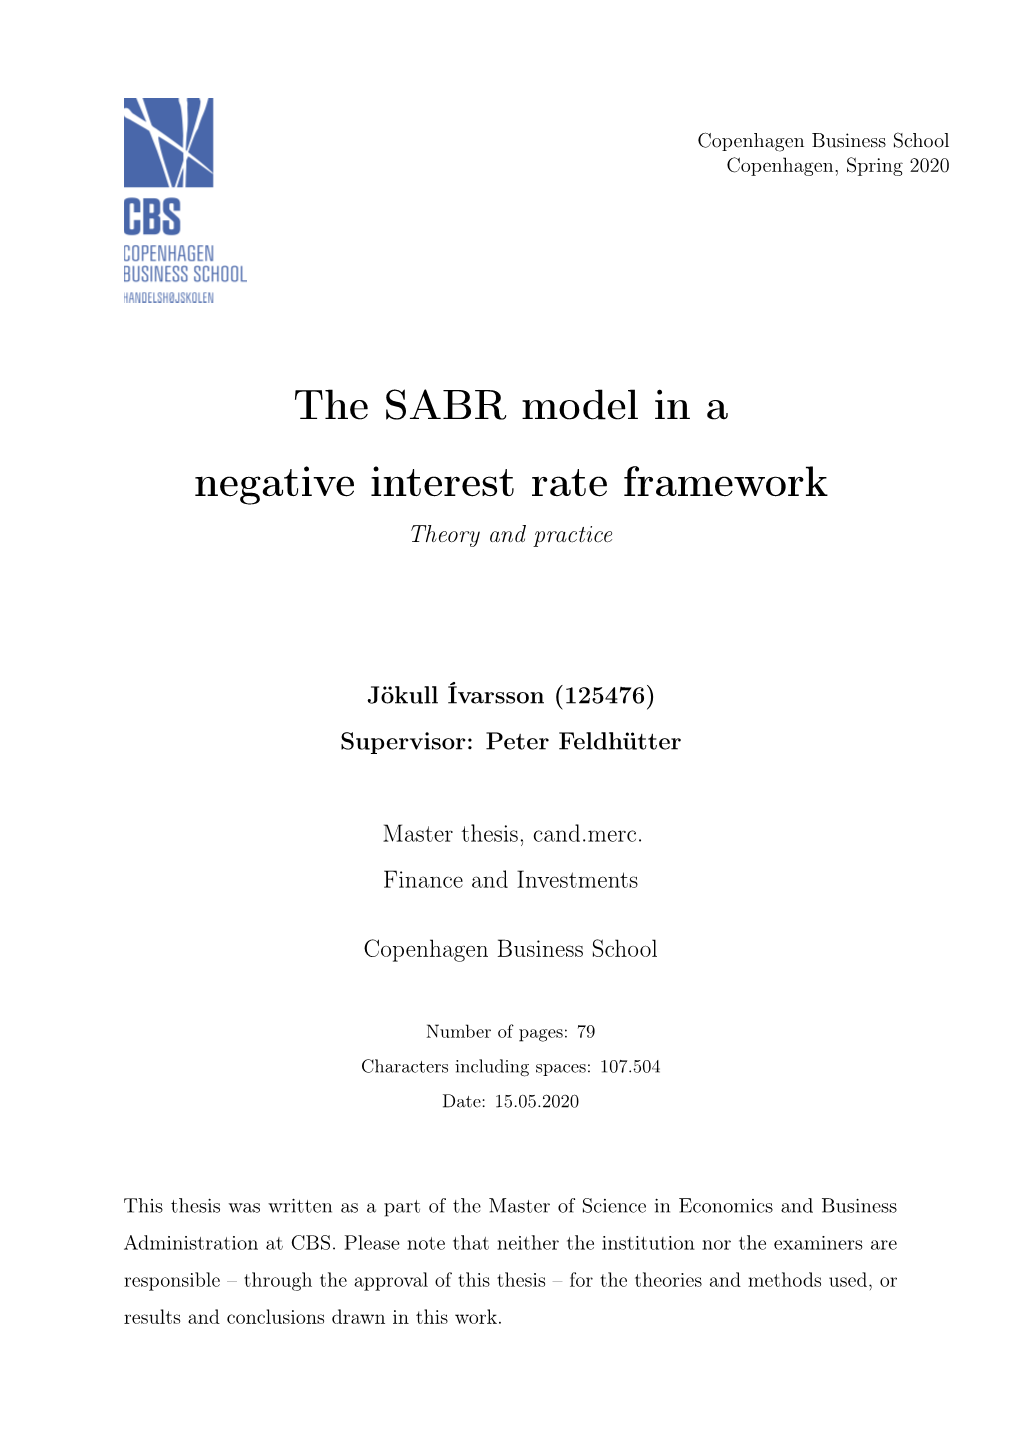 The SABR Model in a Negative Interest Rate Framework Theory and Practice